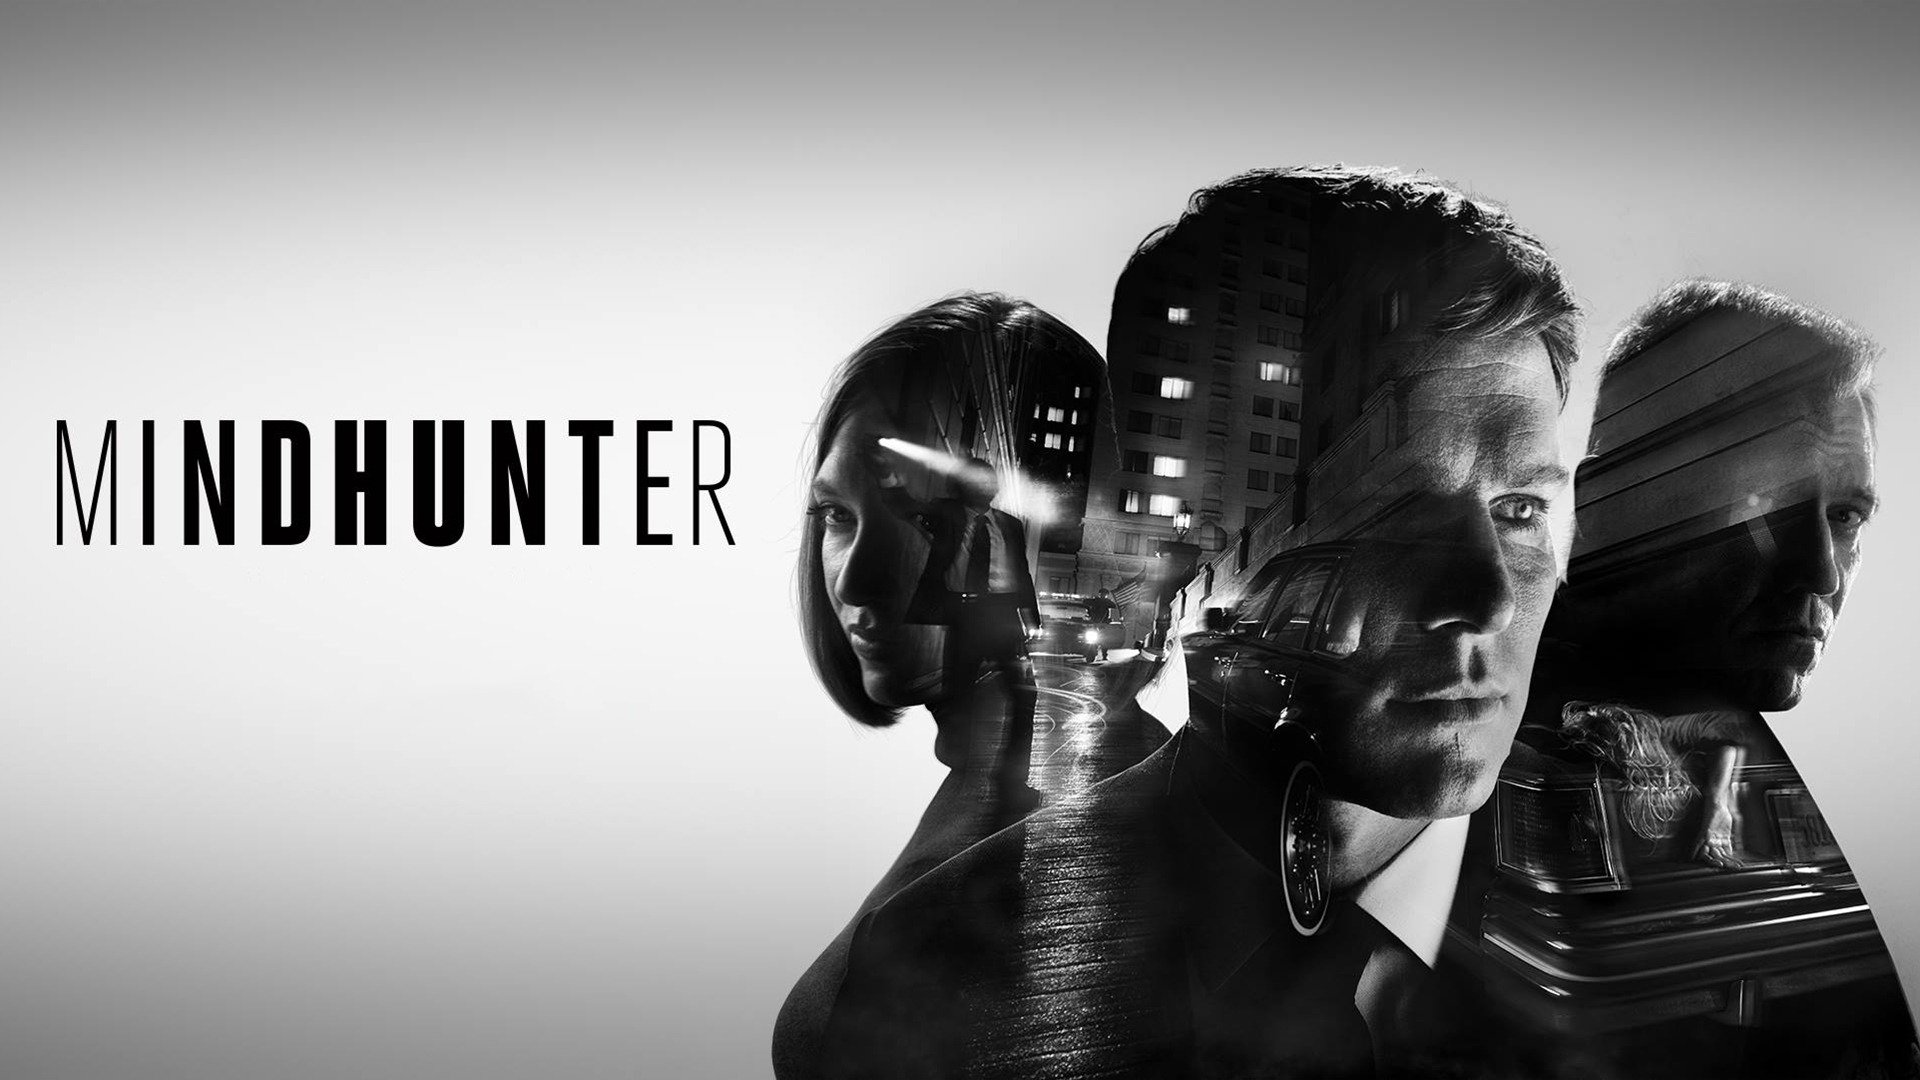 Mindhunter Recap: What Happened at the End of Season 1?